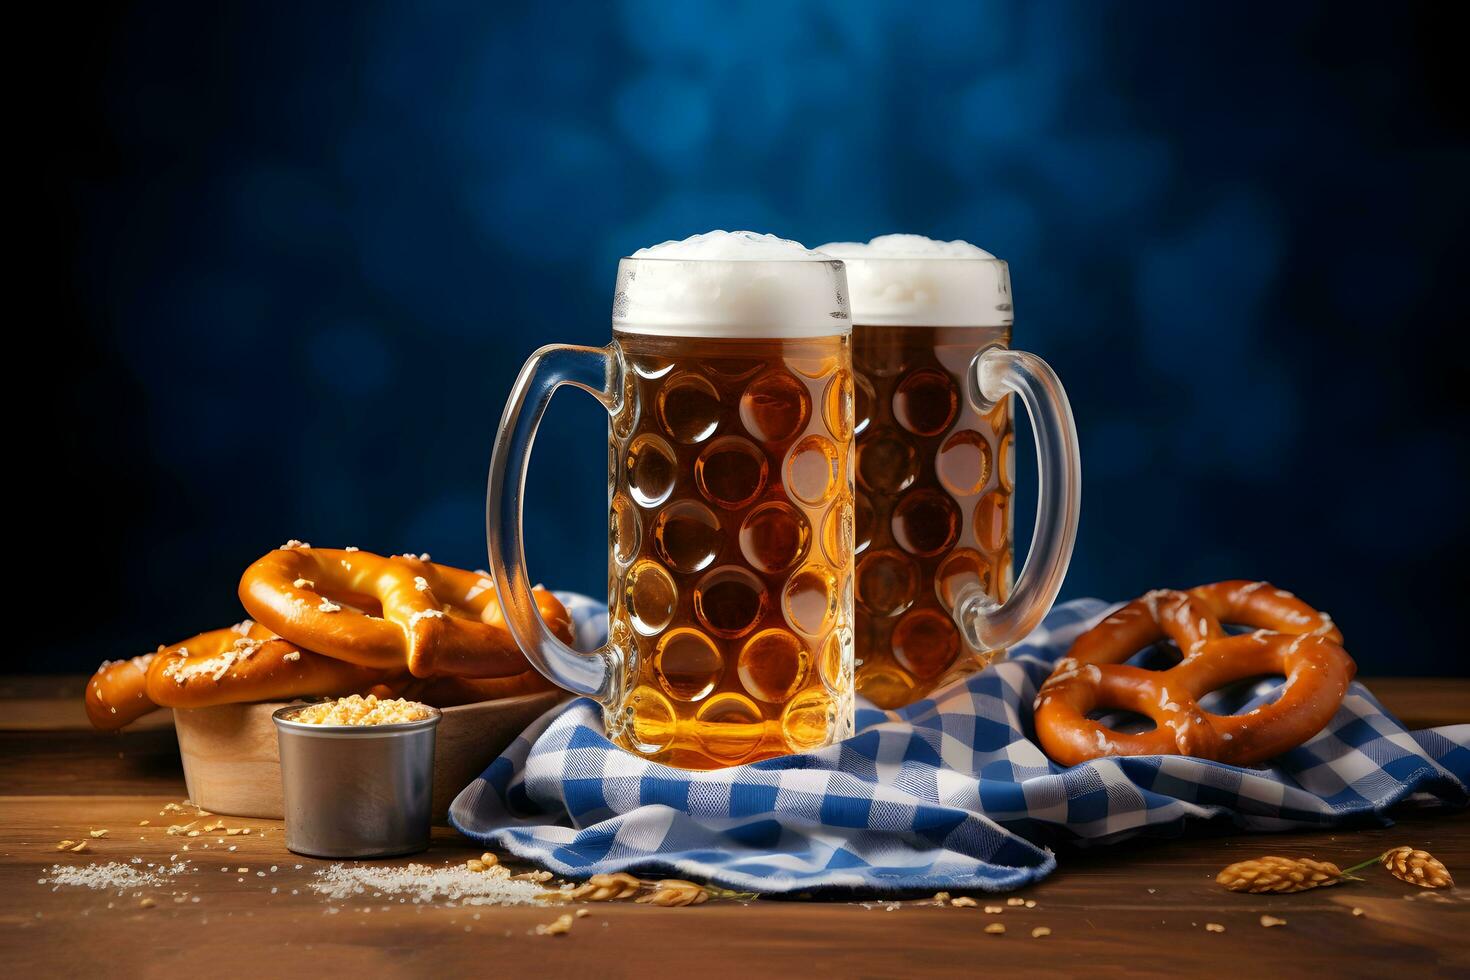 Oktoberfest beer mugs and pretzels on a wooden table with traditional towel. photo